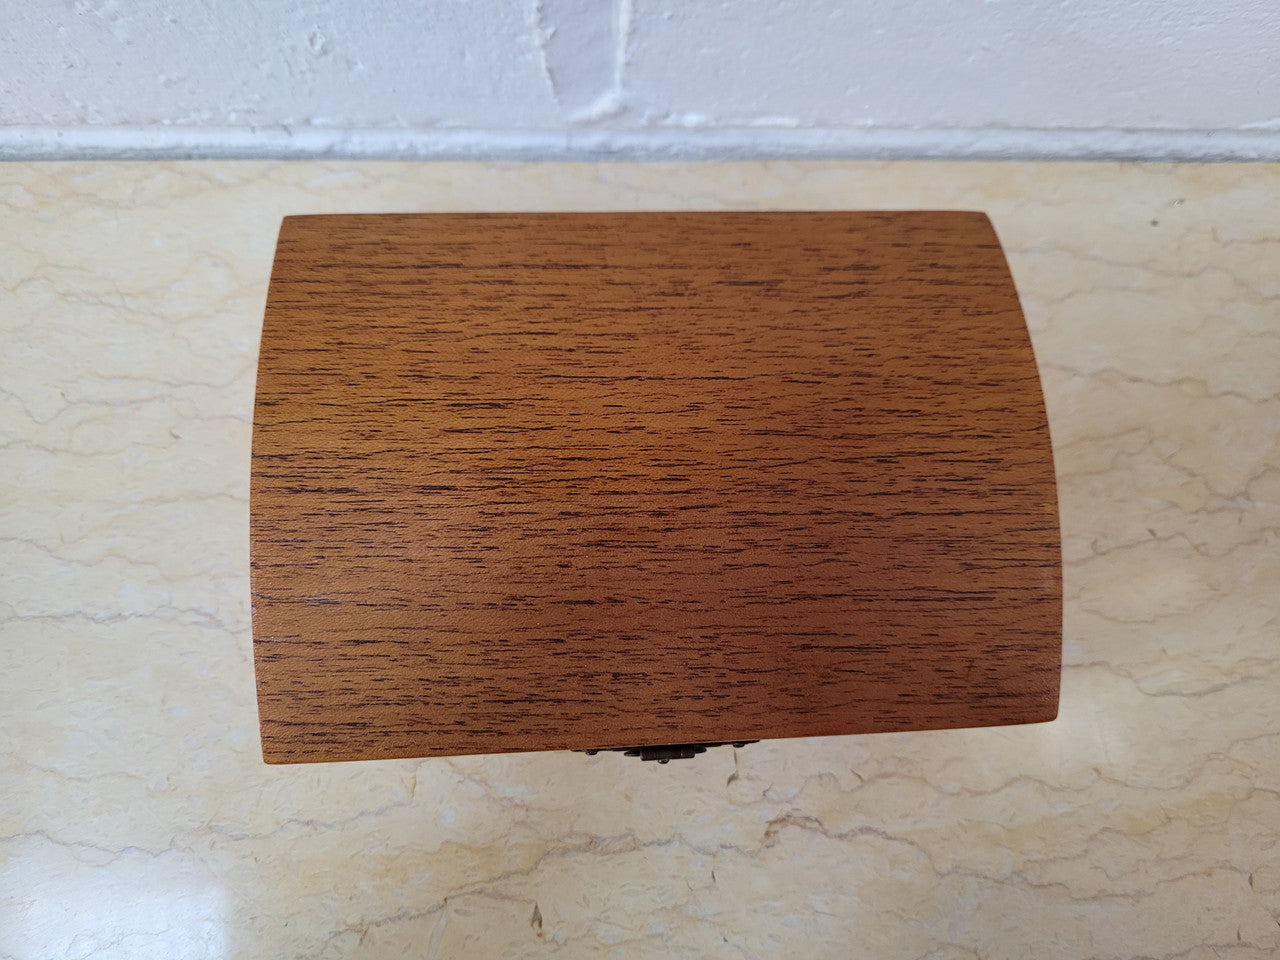 At Moonee Ponds Antiques- Vintage hinged Cedar box with velvet lining. In good condition please view photos as they help form part of the description.